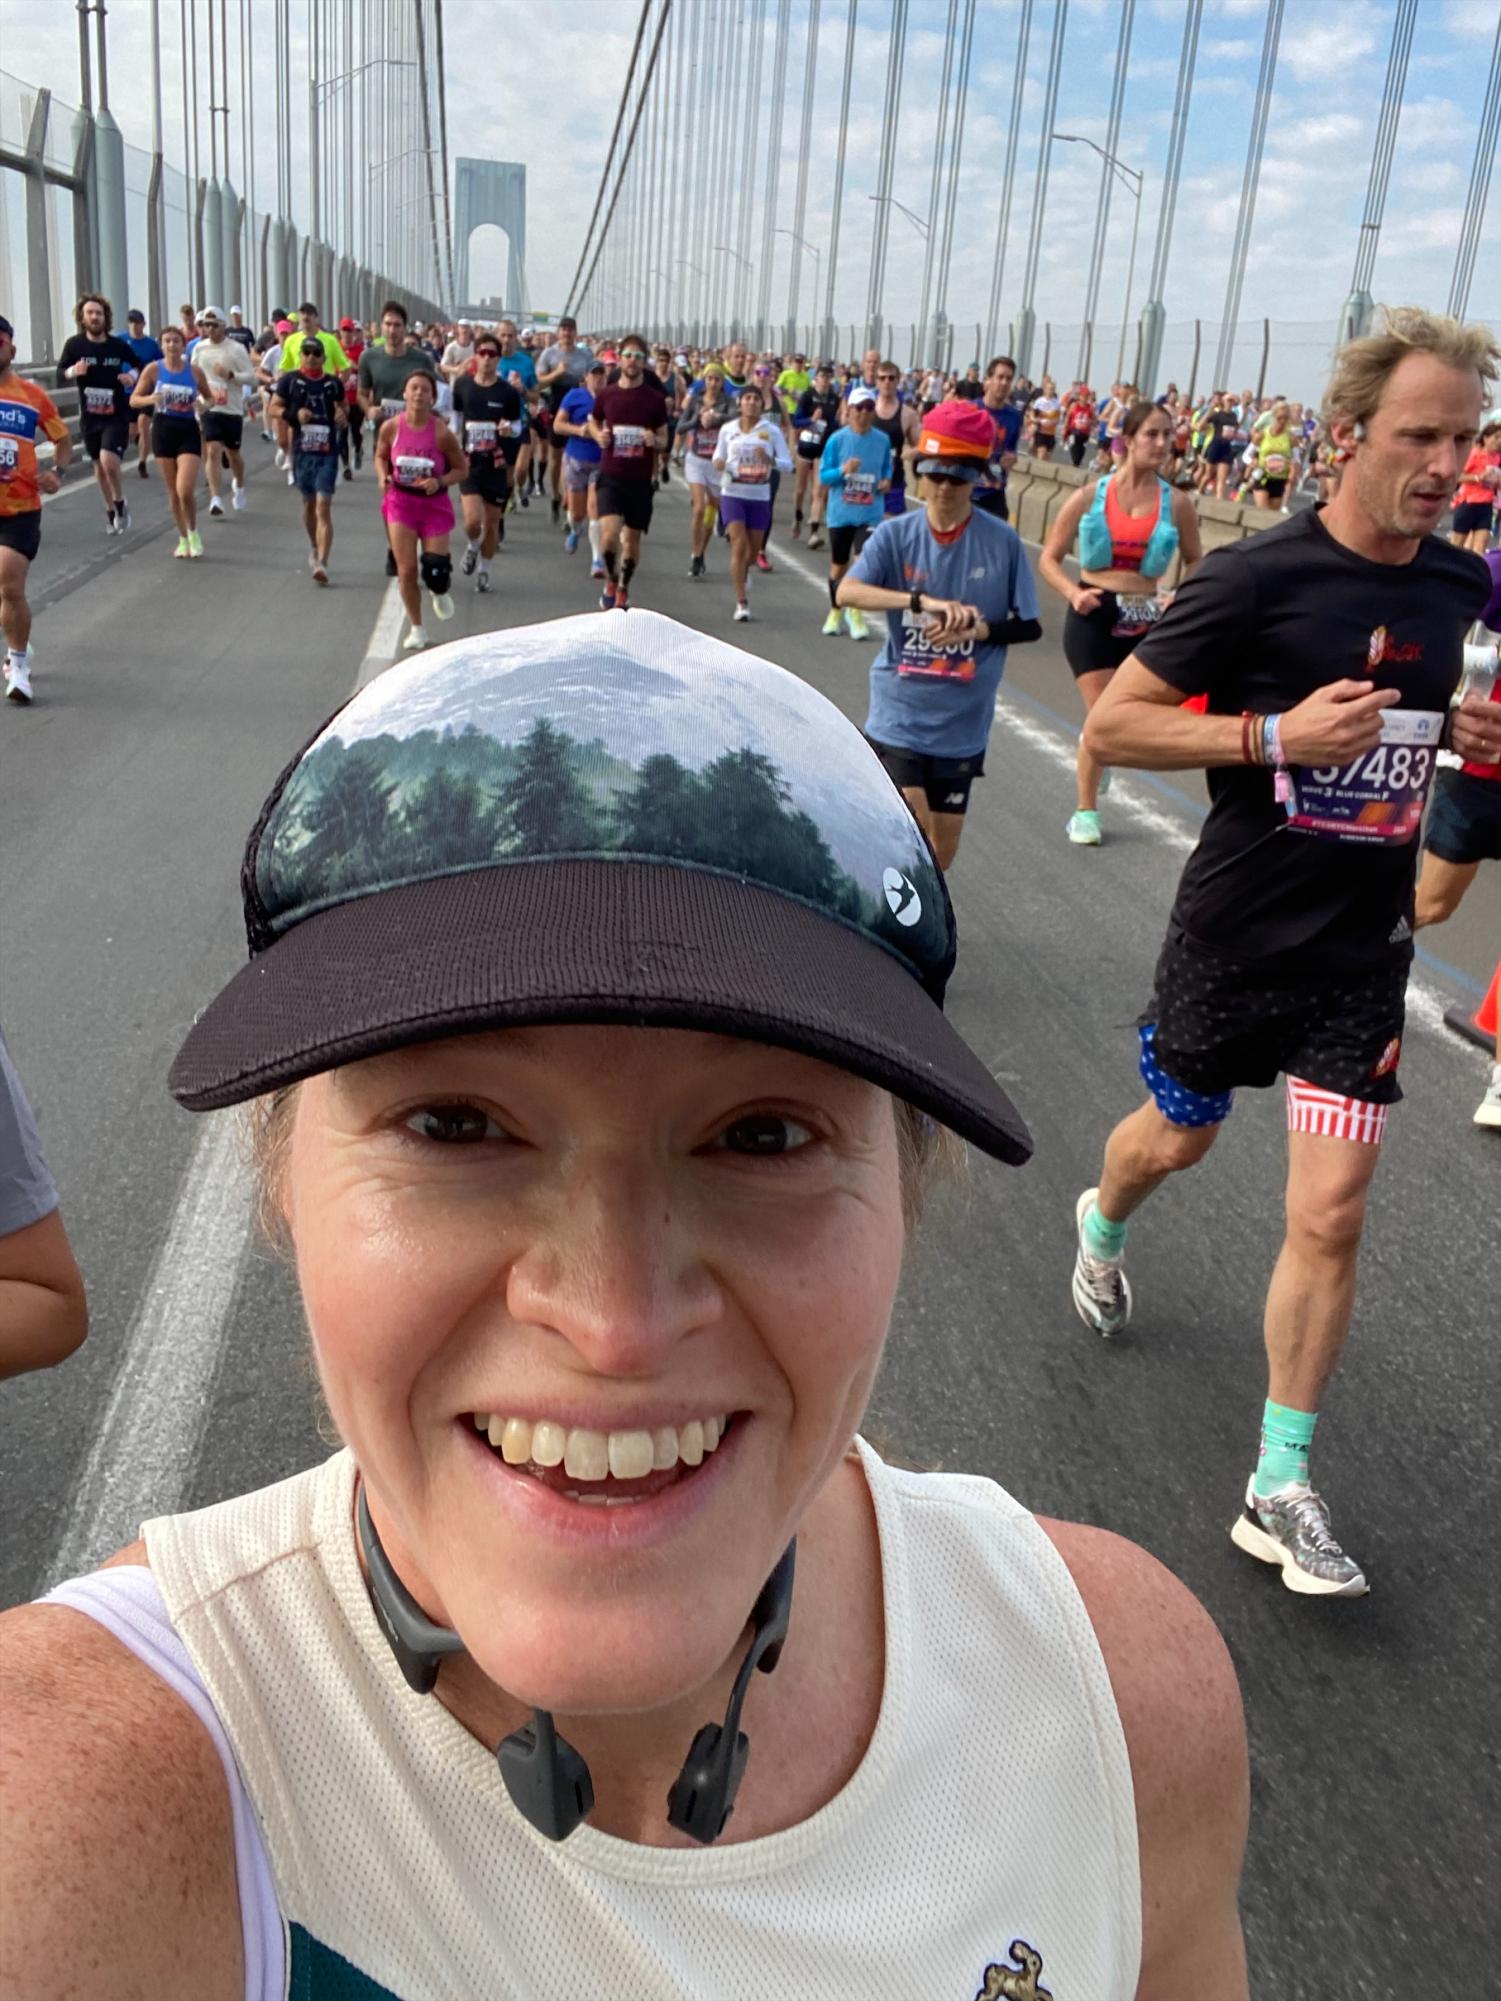 Wheeler captures the wave of runners who begin the marathon on the Staten Island bridge. Photo provided by Melissa Wheeler.